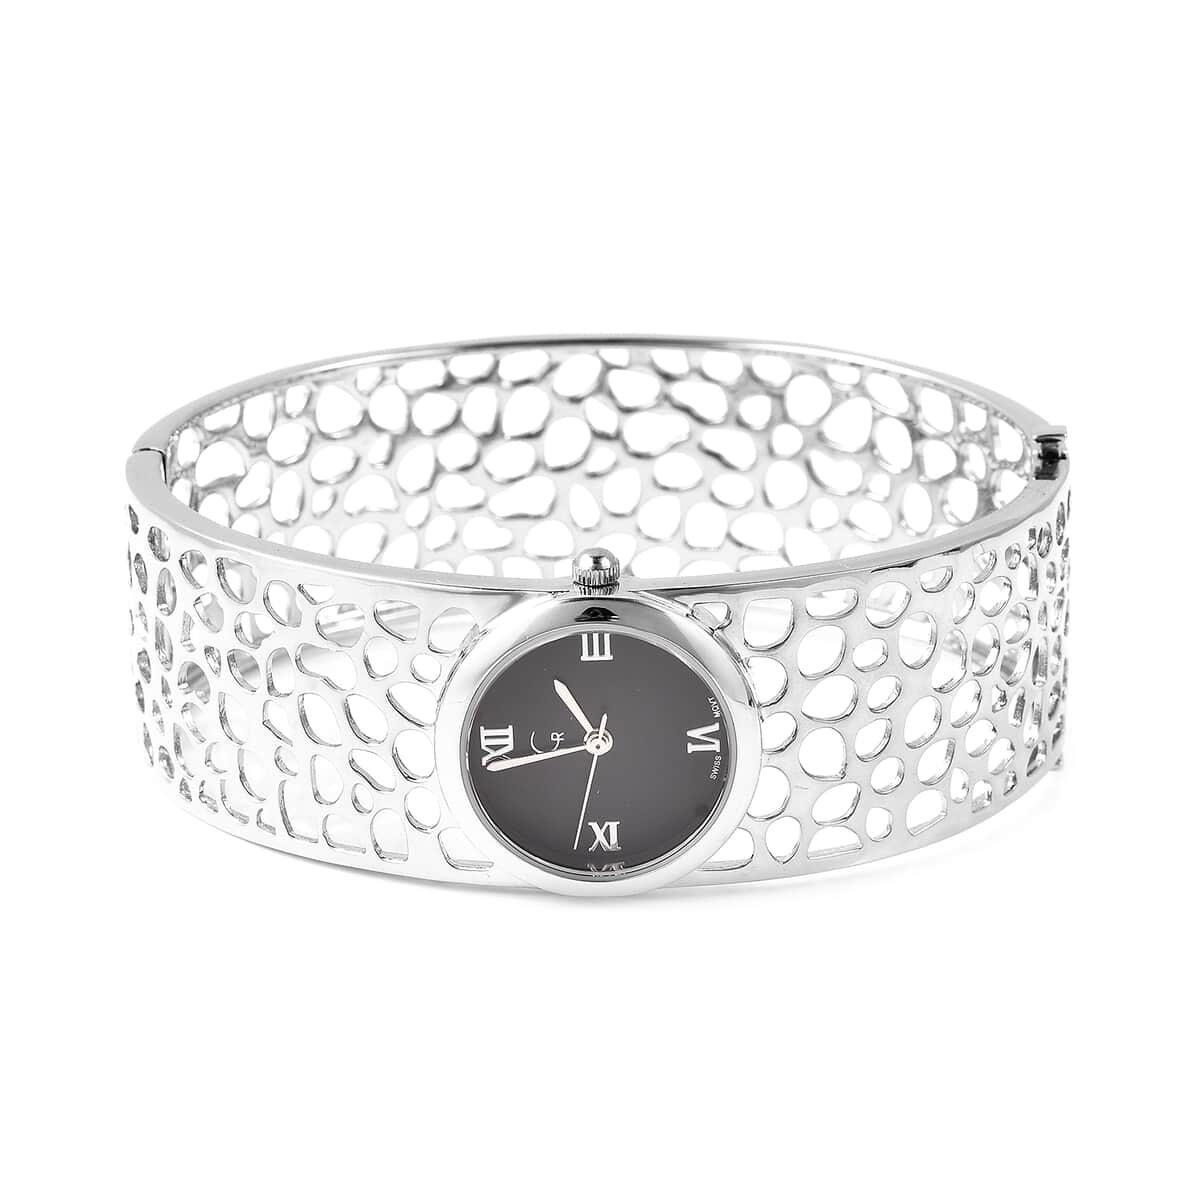 RACHEL GALLEY Swiss Movement Watch Bangle Bracelet in Sterling Silver with Stainless Steel Back (7.5 in) 52.10 Grams image number 3